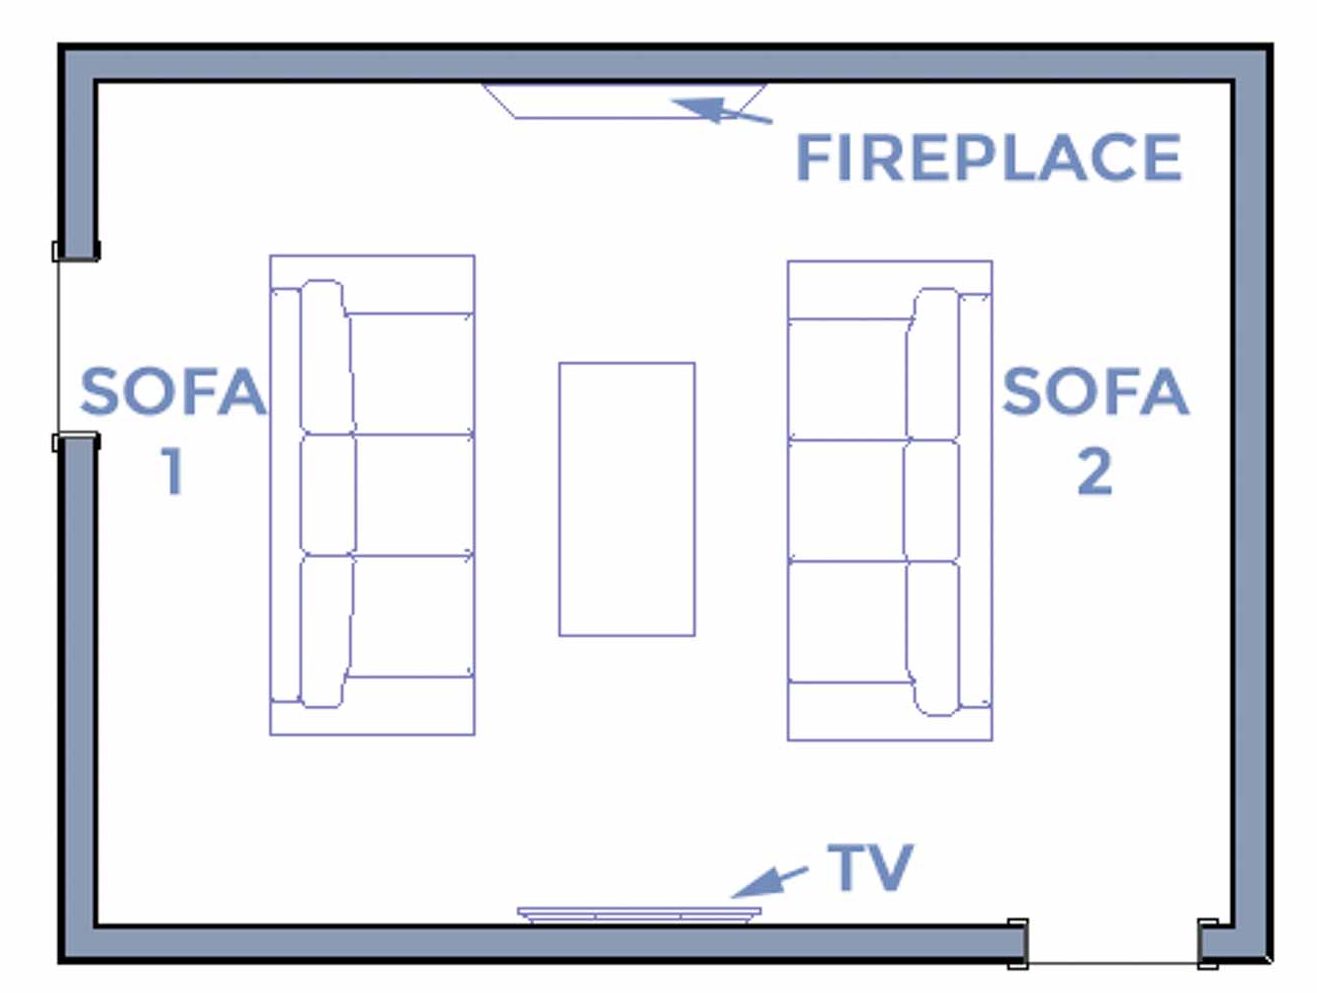 Living room layout with TV on opposite wall to the fireplace and perpendicular sofas